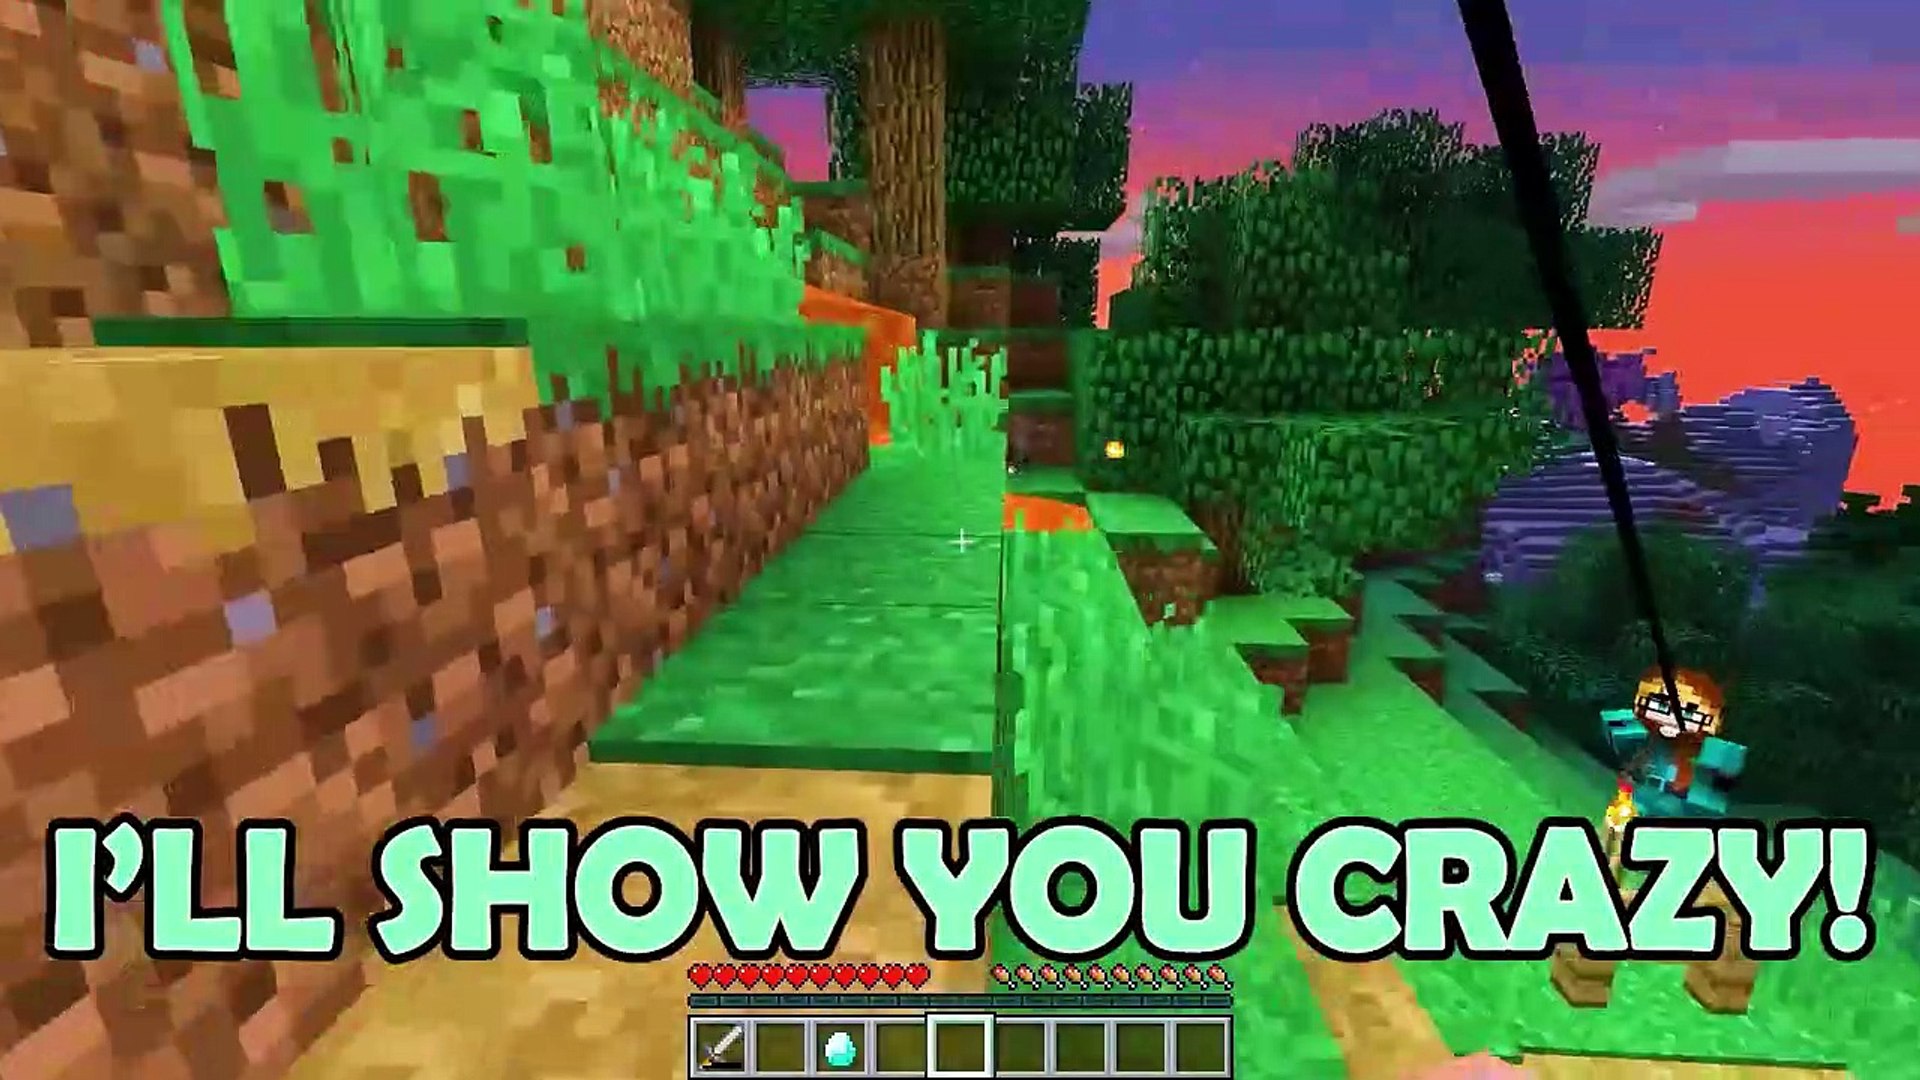 Stopping TIME To Help My FRIENDS In Minecraft! - video Dailymotion